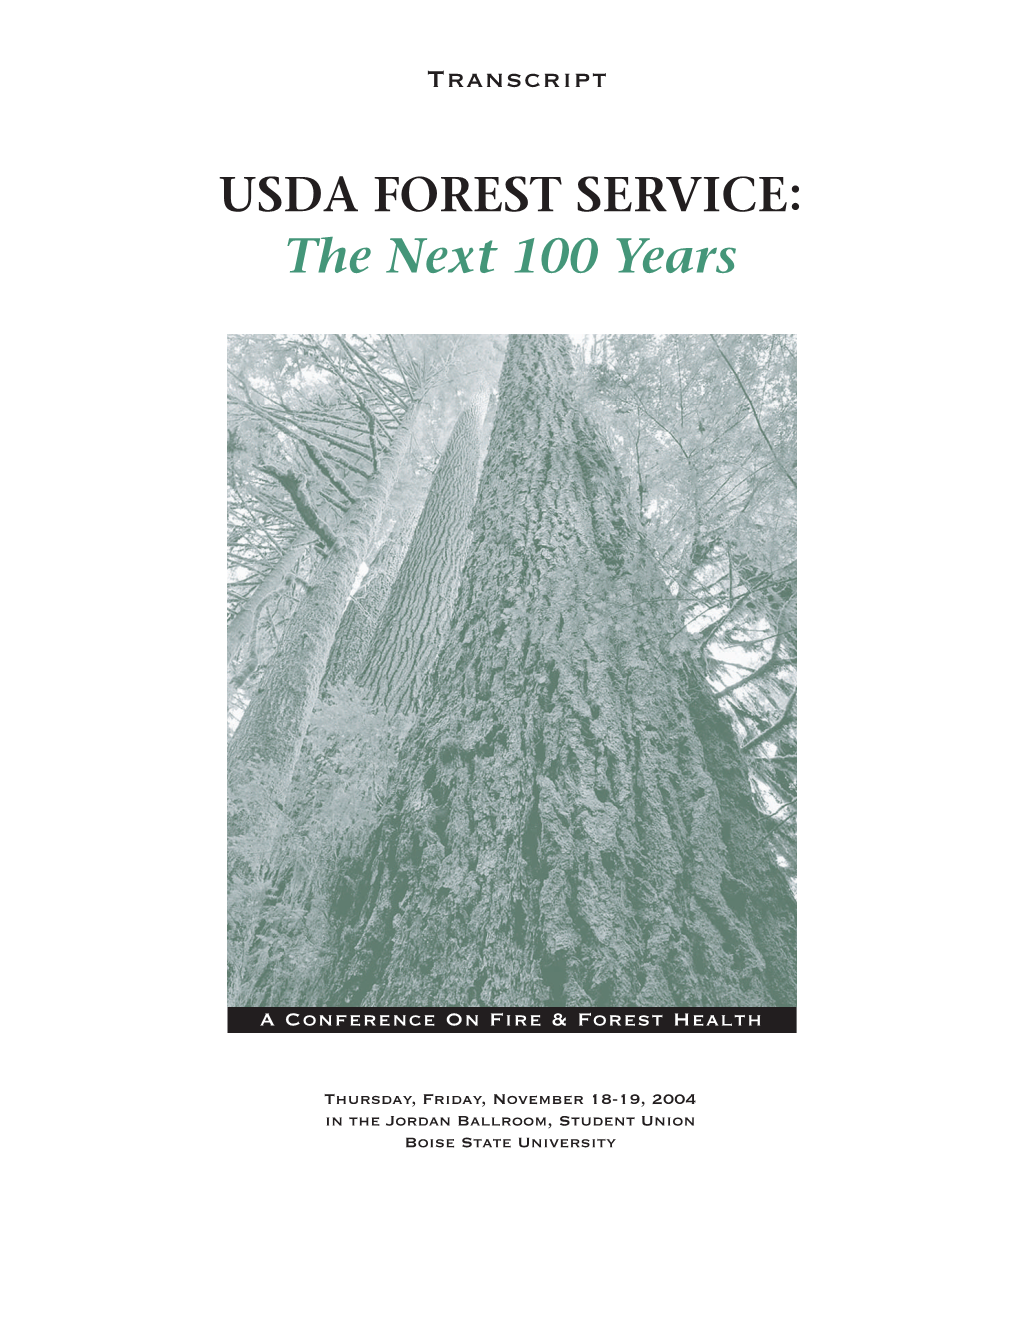 USDA FOREST SERVICE: the Next 100 Years